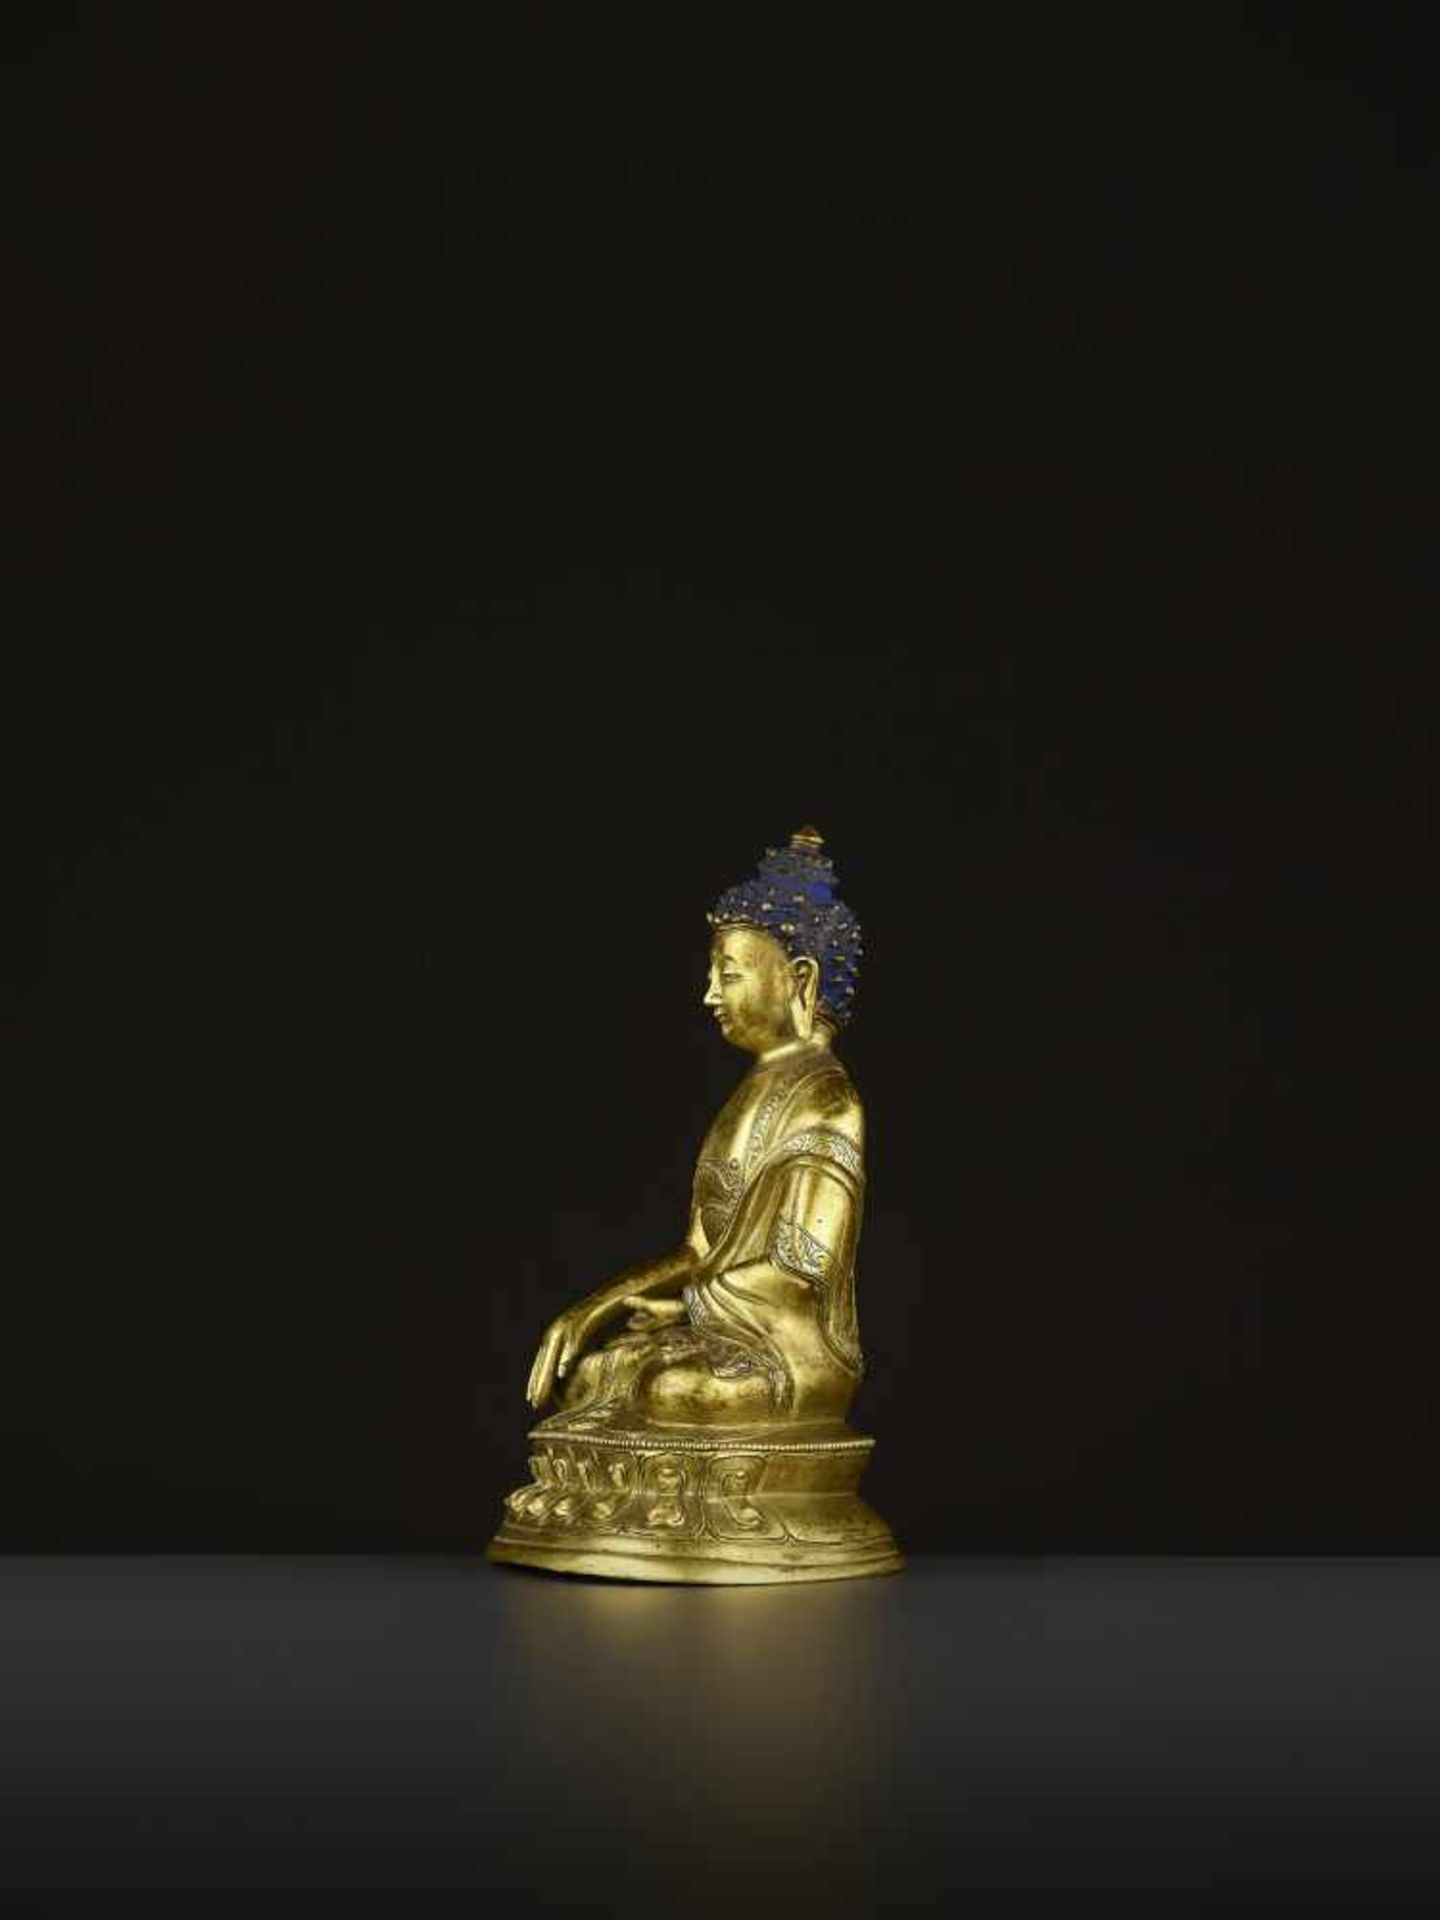 A GILT COPPER-ALLOY BUDDHA, QING China, 18th-19th century. The majestic deity is well cast seated in - Image 4 of 8